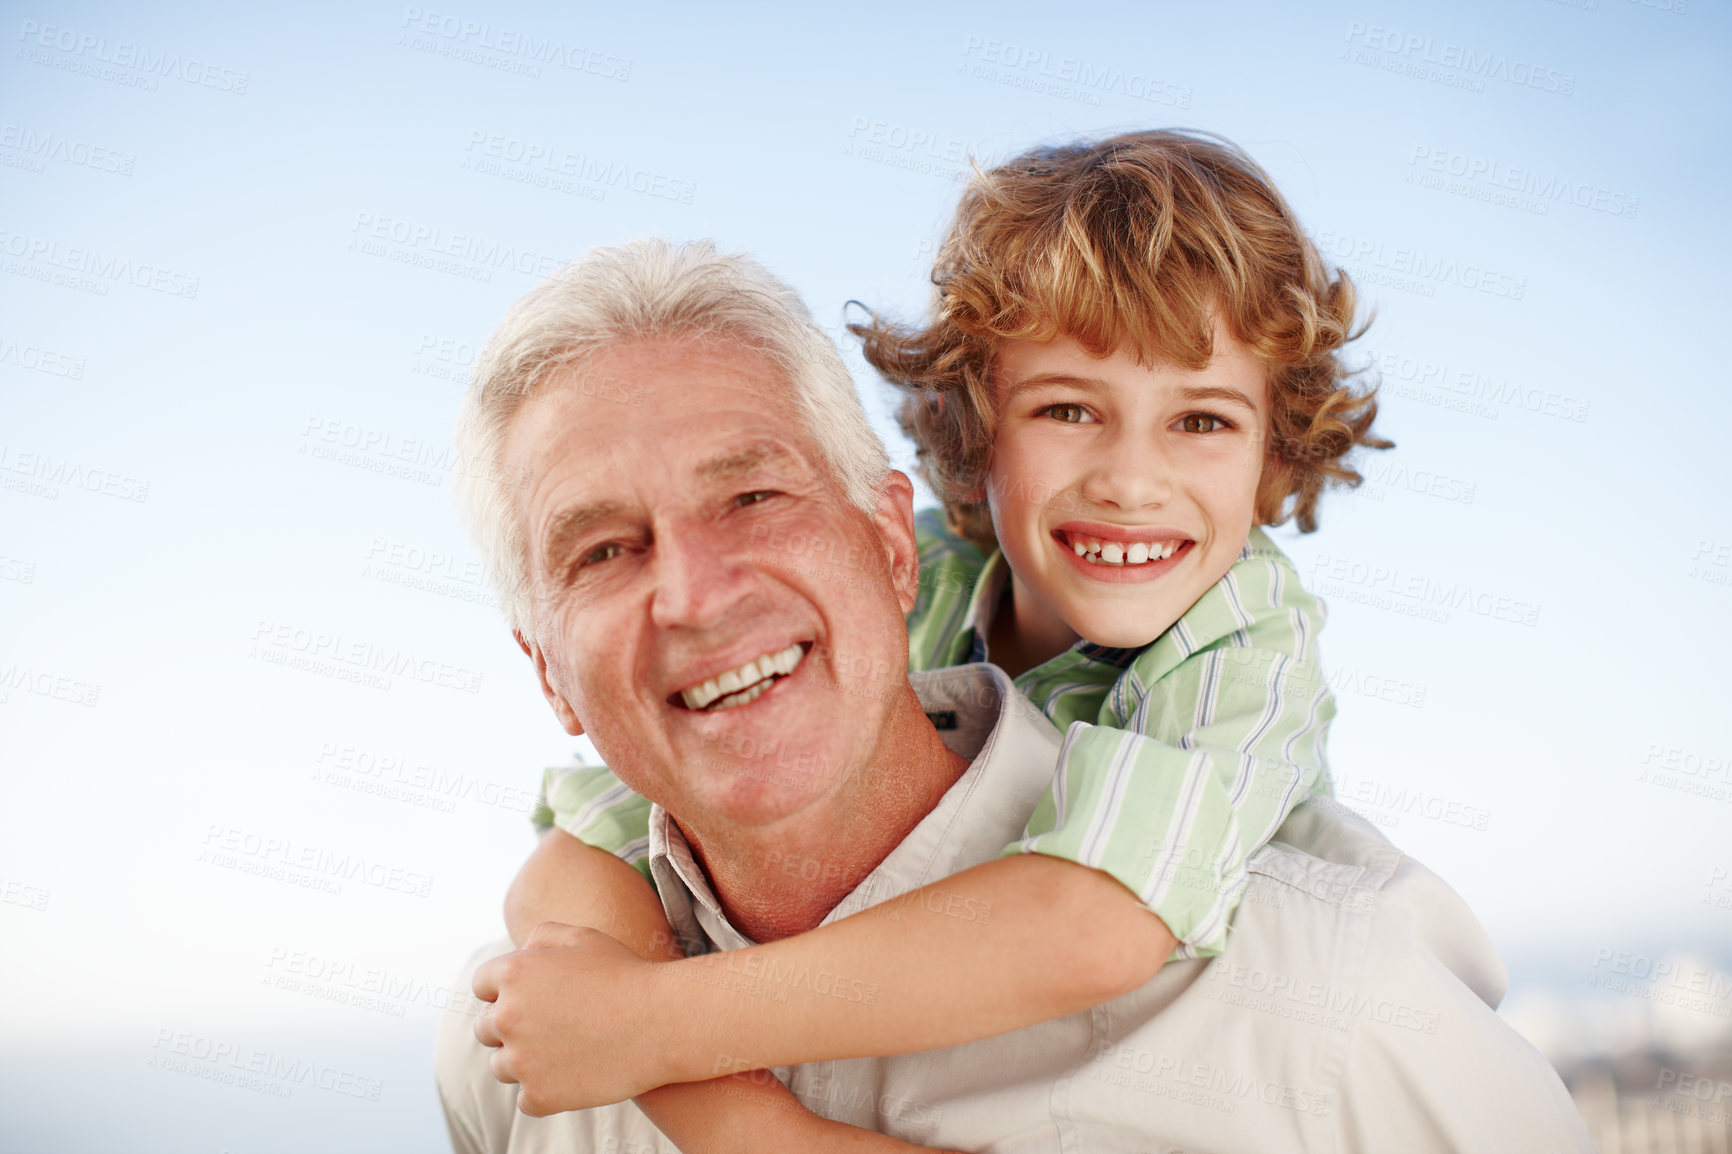 Buy stock photo Cropped portrait of a young boy getting piggybacked by his grandfather